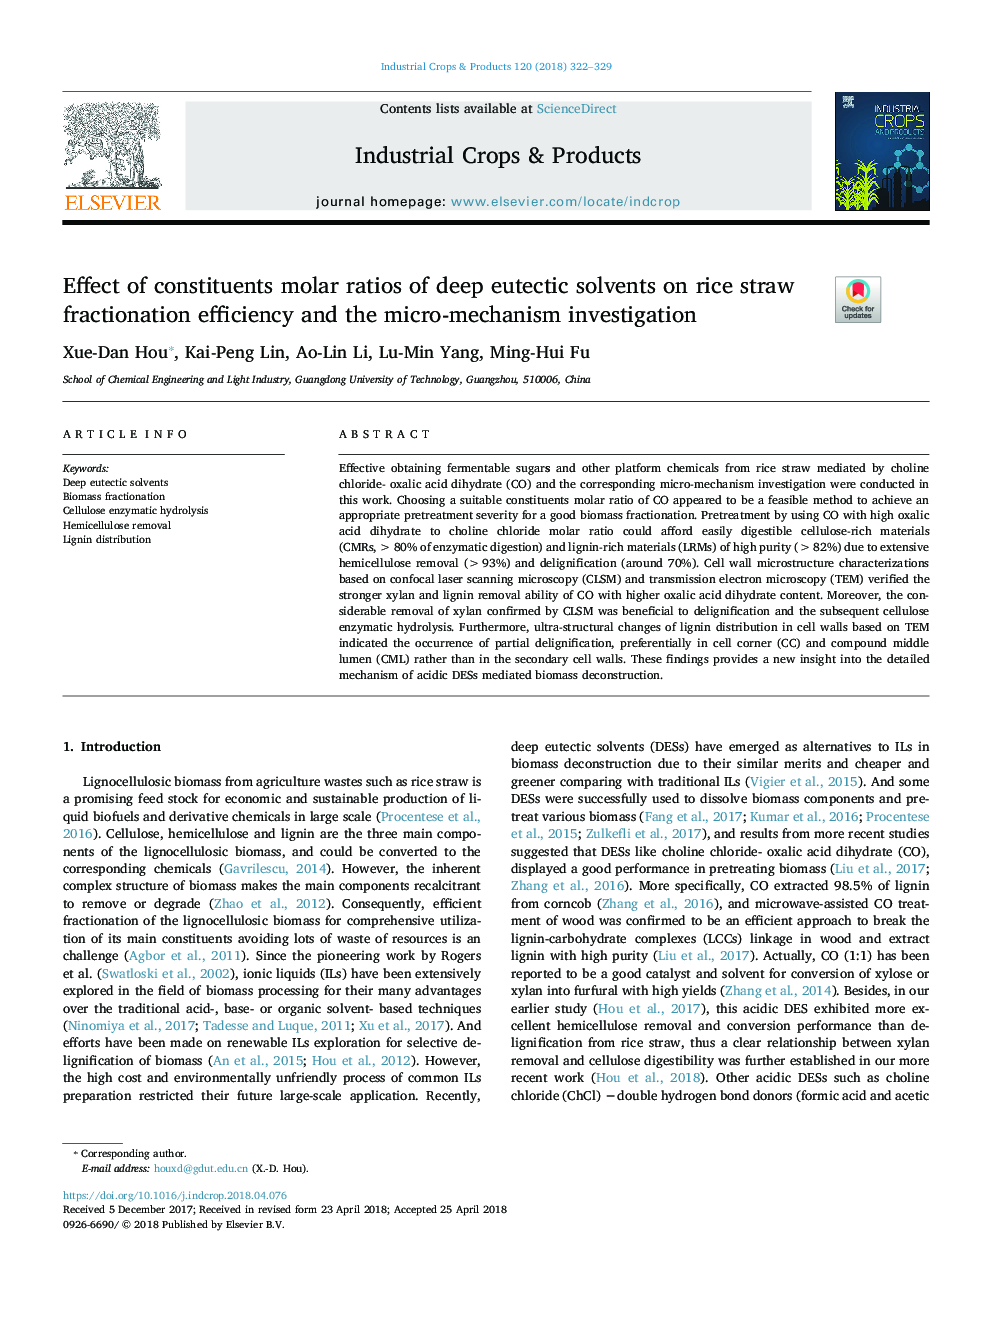 Effect of constituents molar ratios of deep eutectic solvents on rice straw fractionation efficiency and the micro-mechanism investigation